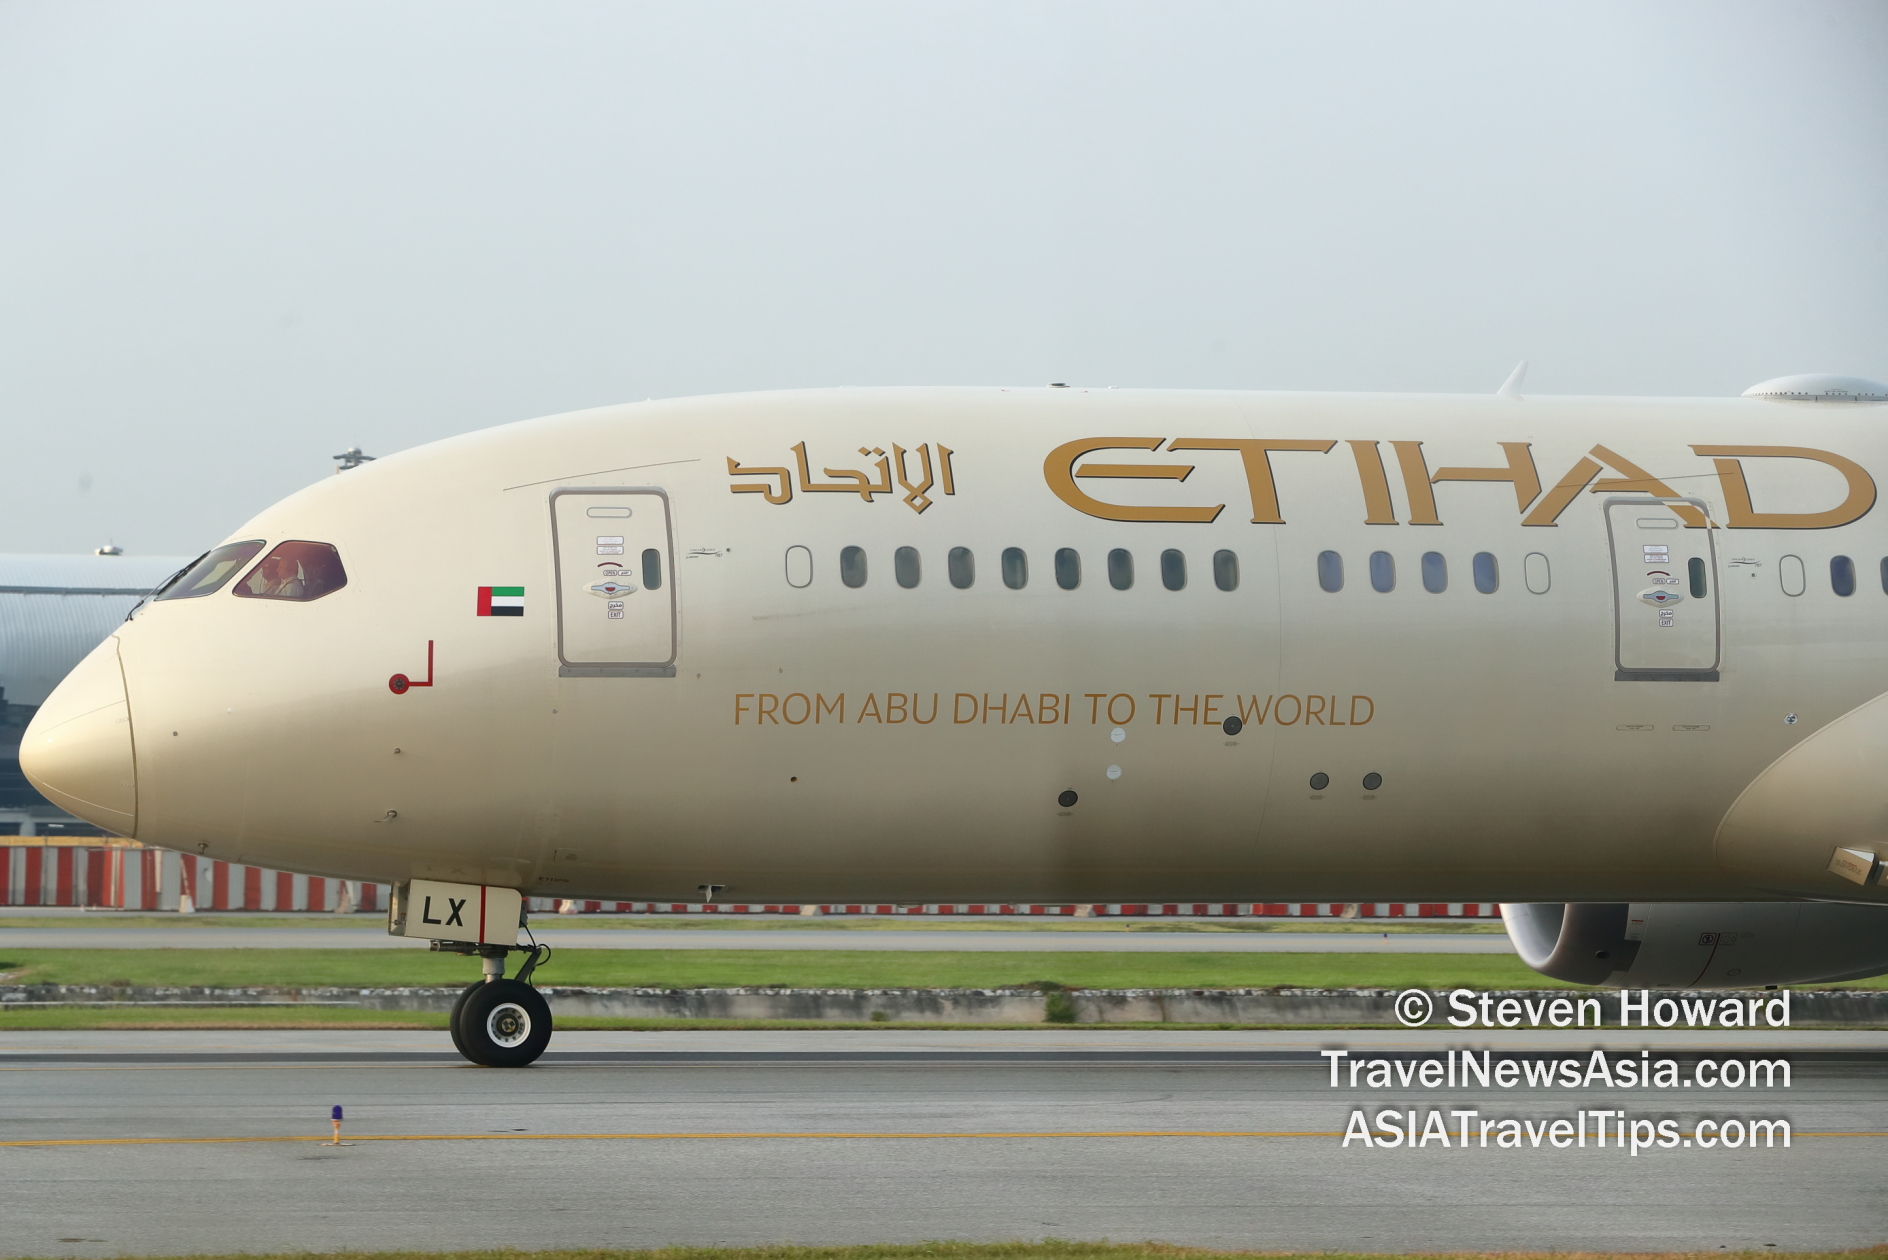 Etihad Airways B787-9 reg: A6-BLX. Picture by Steven Howard of TravelNewsAsia.com Click to enlarge.